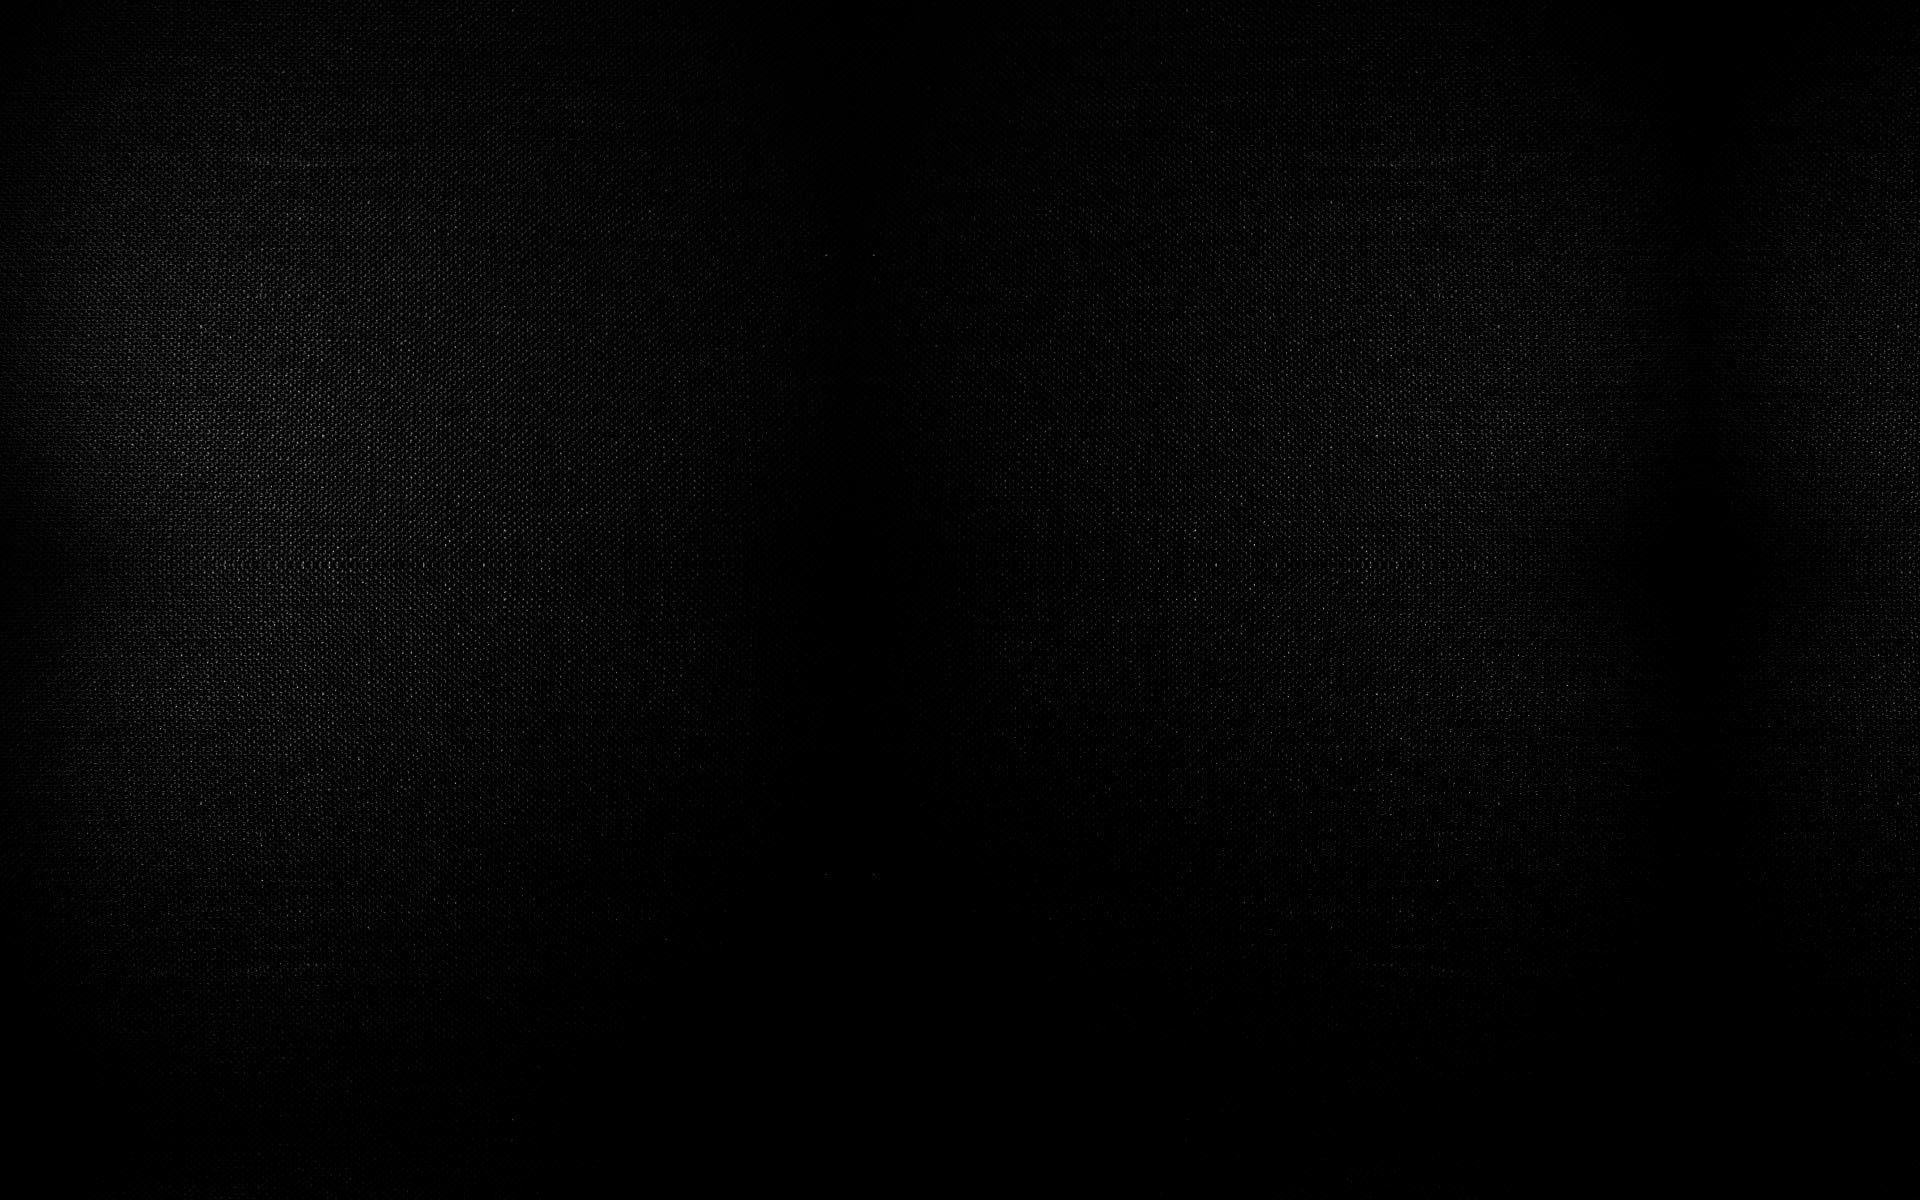 Pure Black Computer Wallpapers - Top Free Pure Black Computer ...